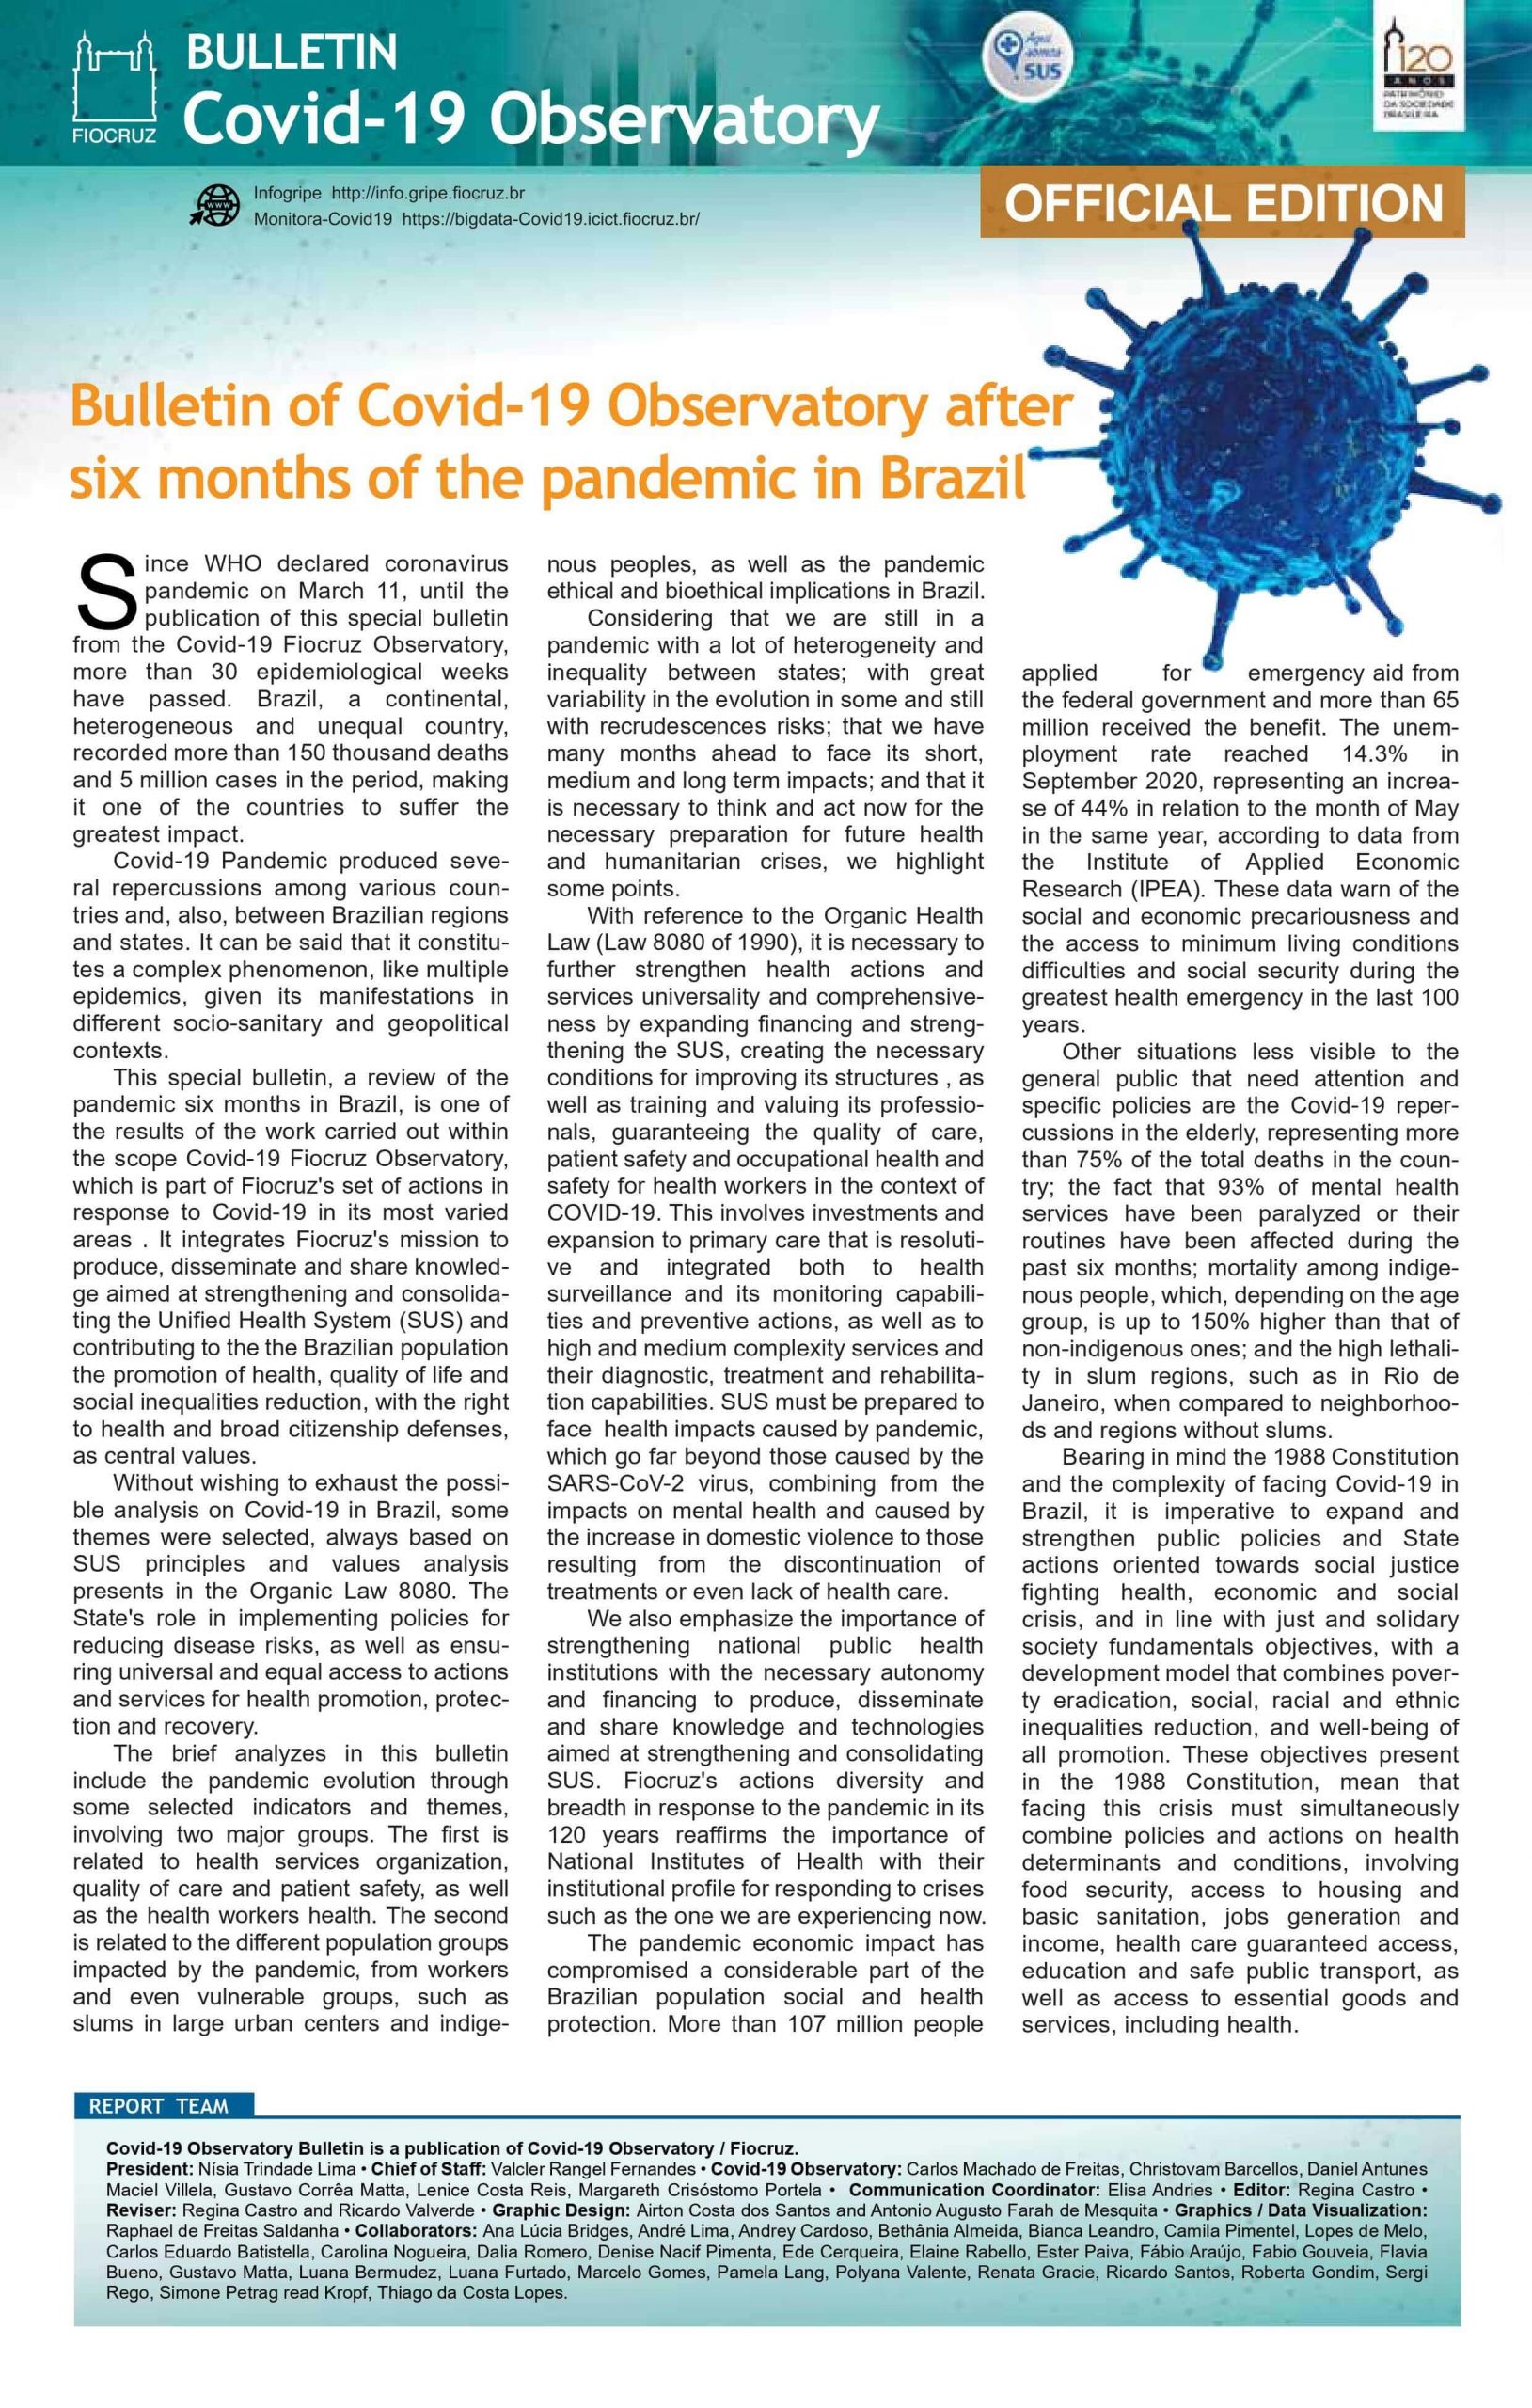 After six months of the COVID-19 pandemic in Brazil